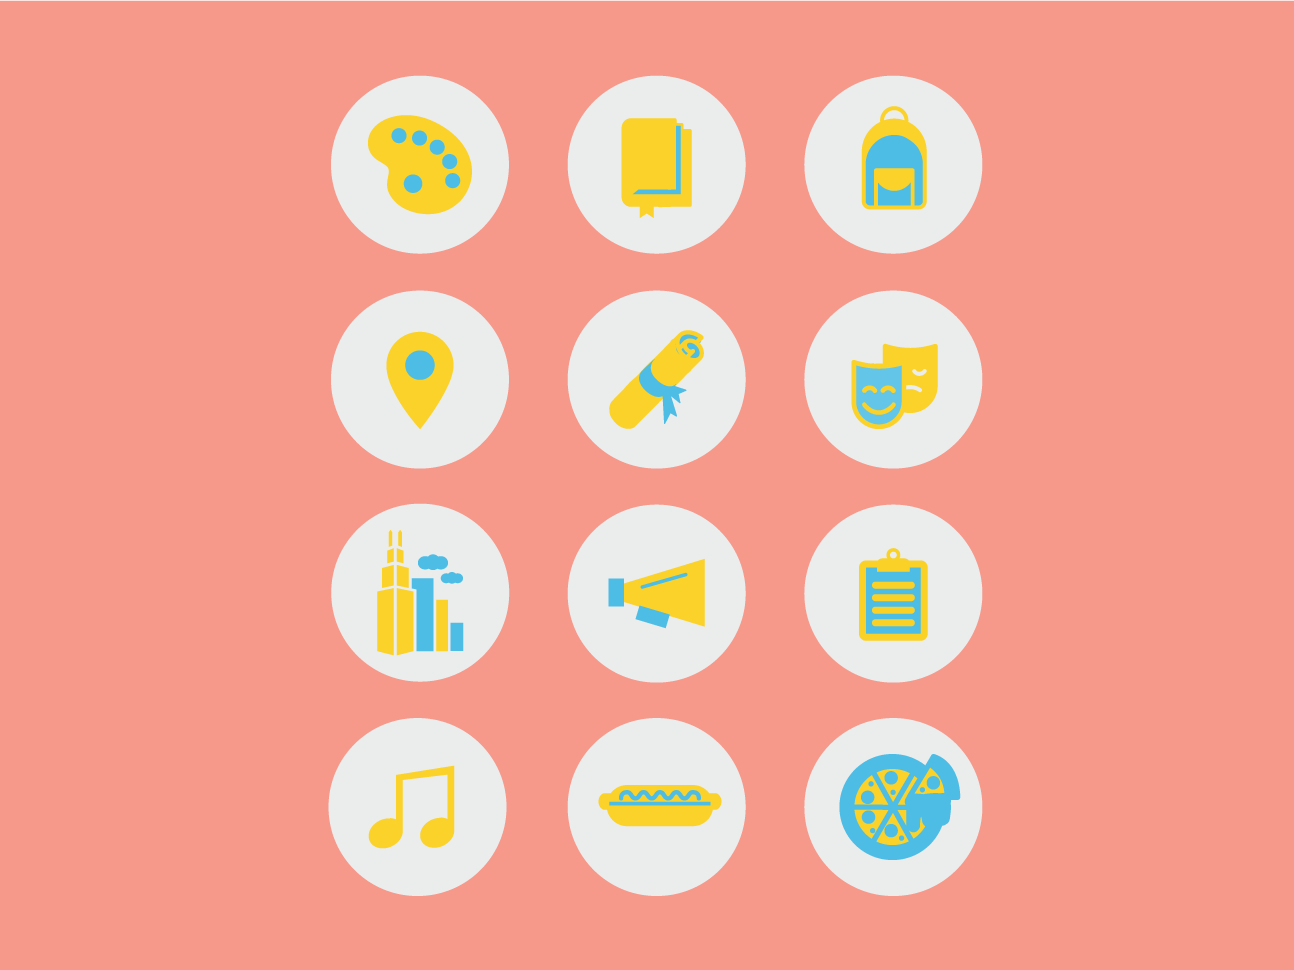 University Icons by Laura Bencur on Dribbble